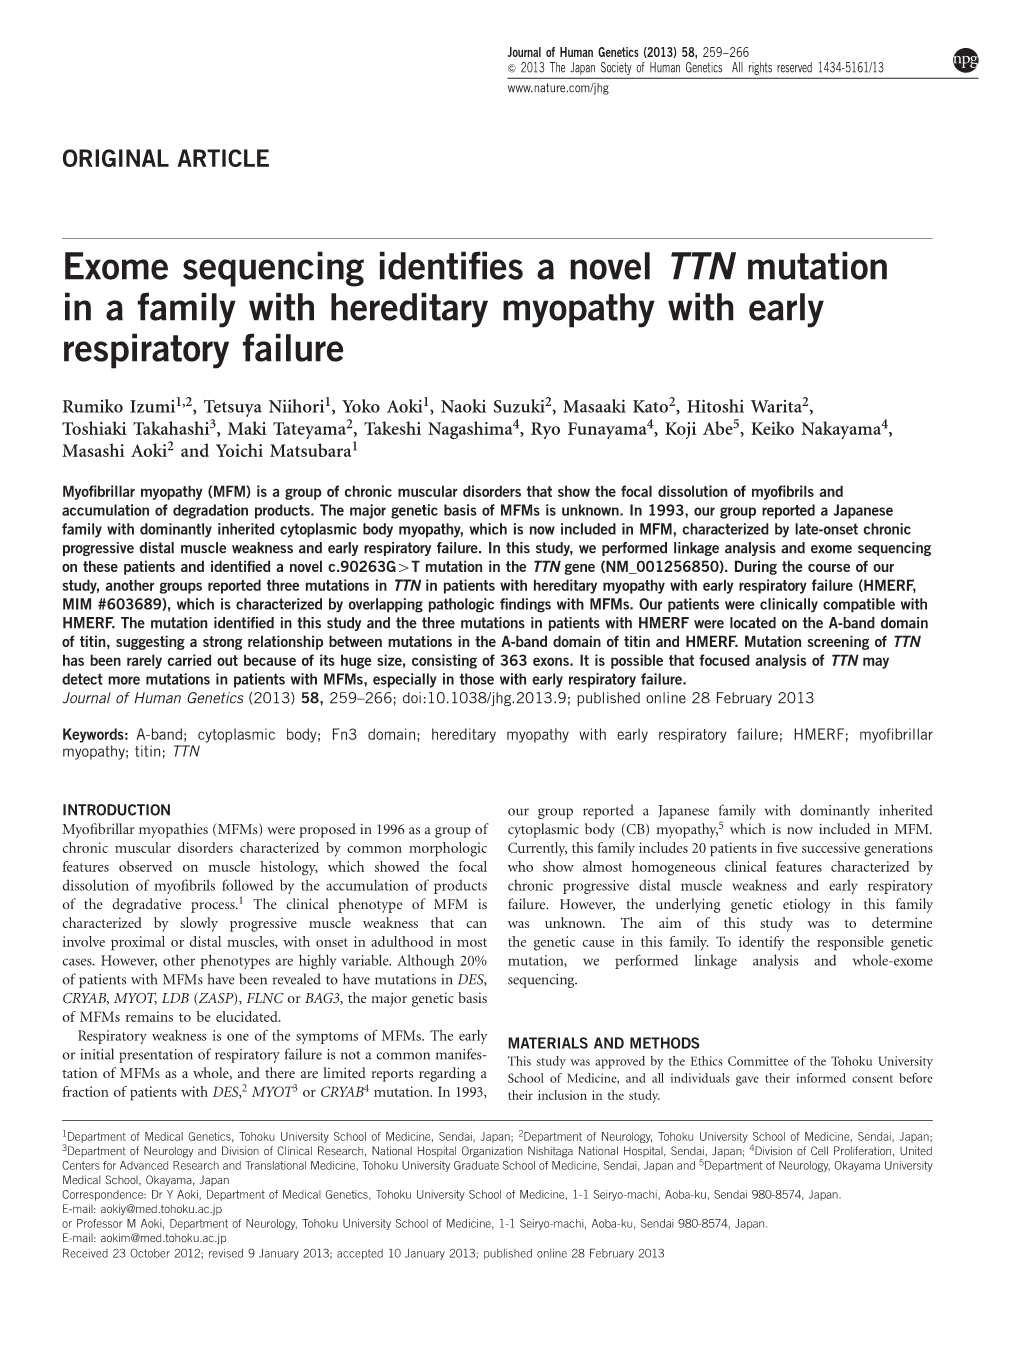 Exome Sequencing Identifies a Novel TTN Mutation in a Family